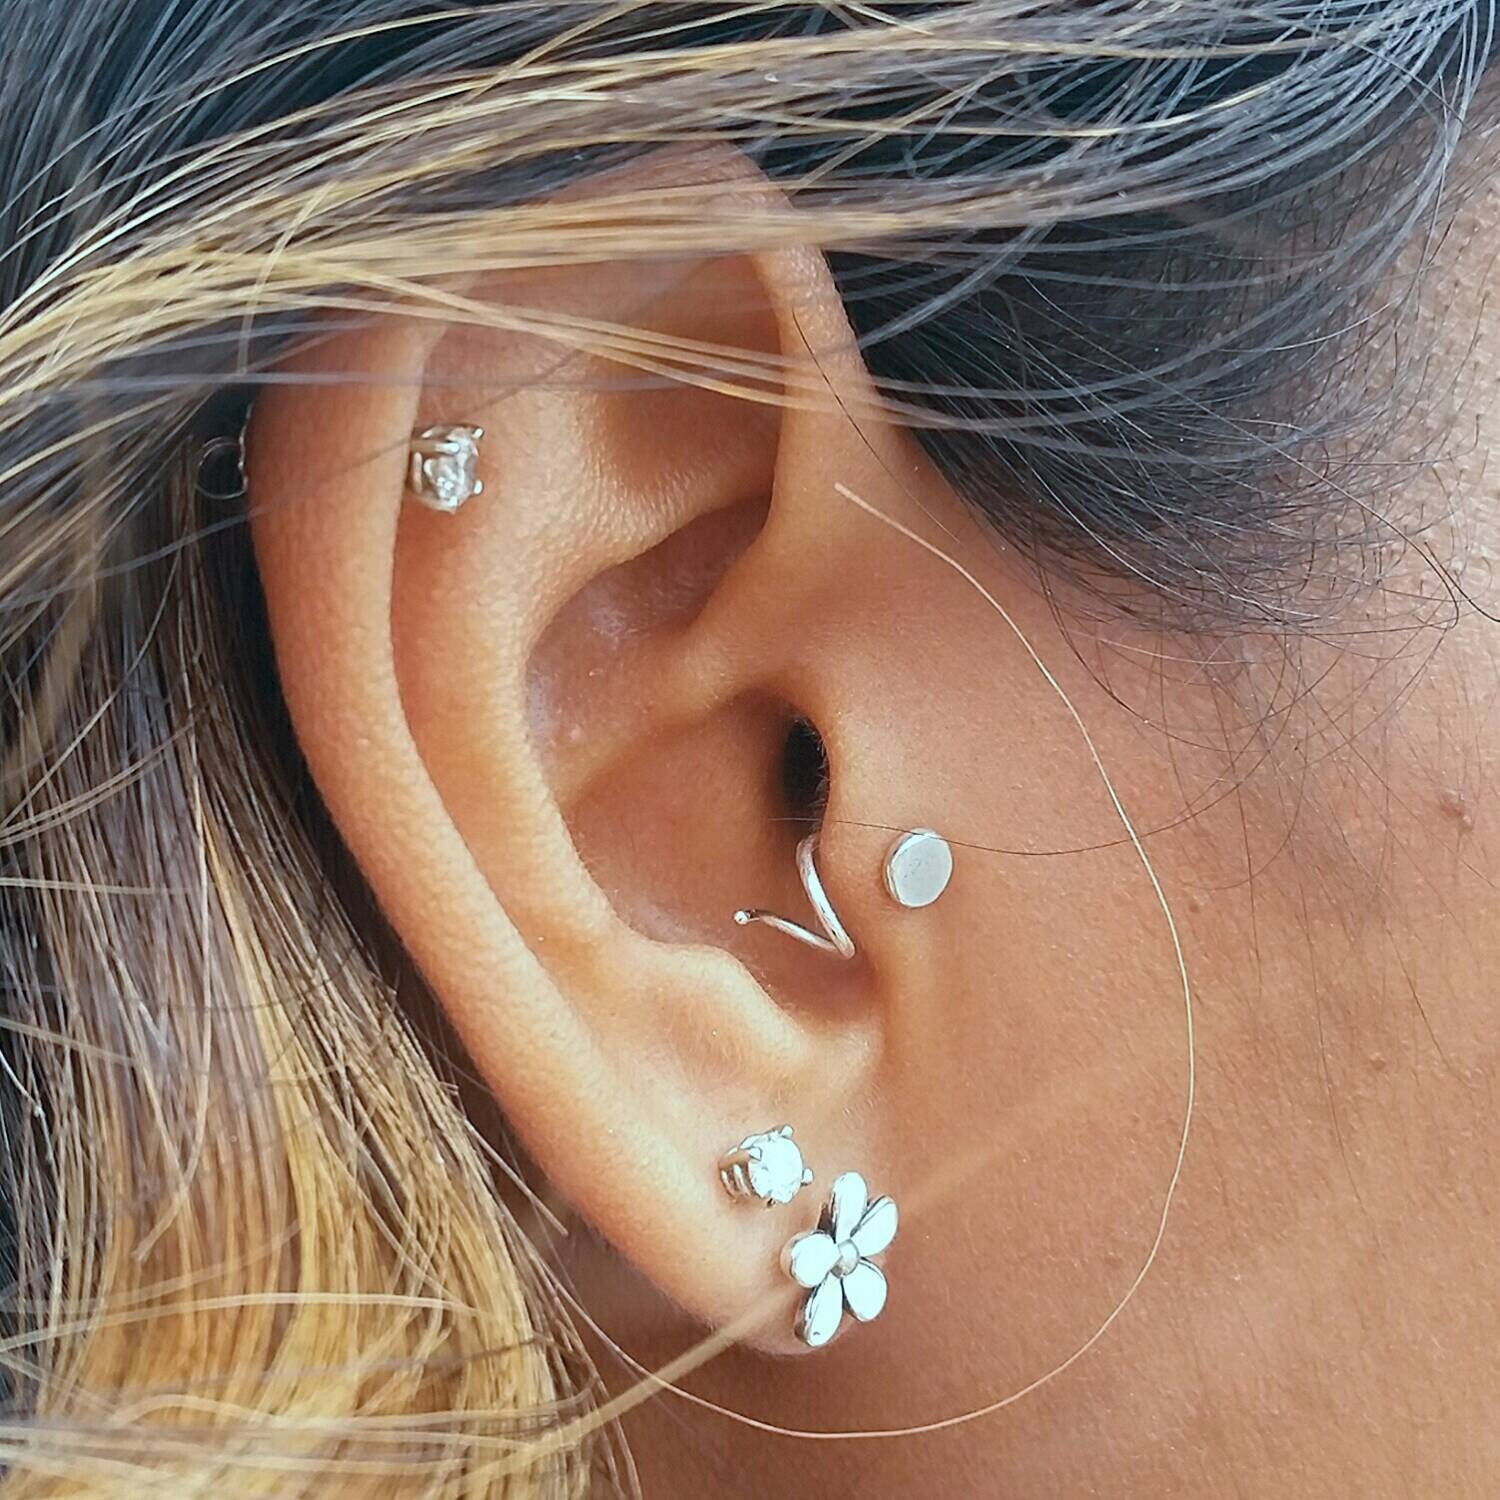 Body Jewelry Ears
 Tiny Tragus Earring Stud Body Jewelry Coil Style Rose